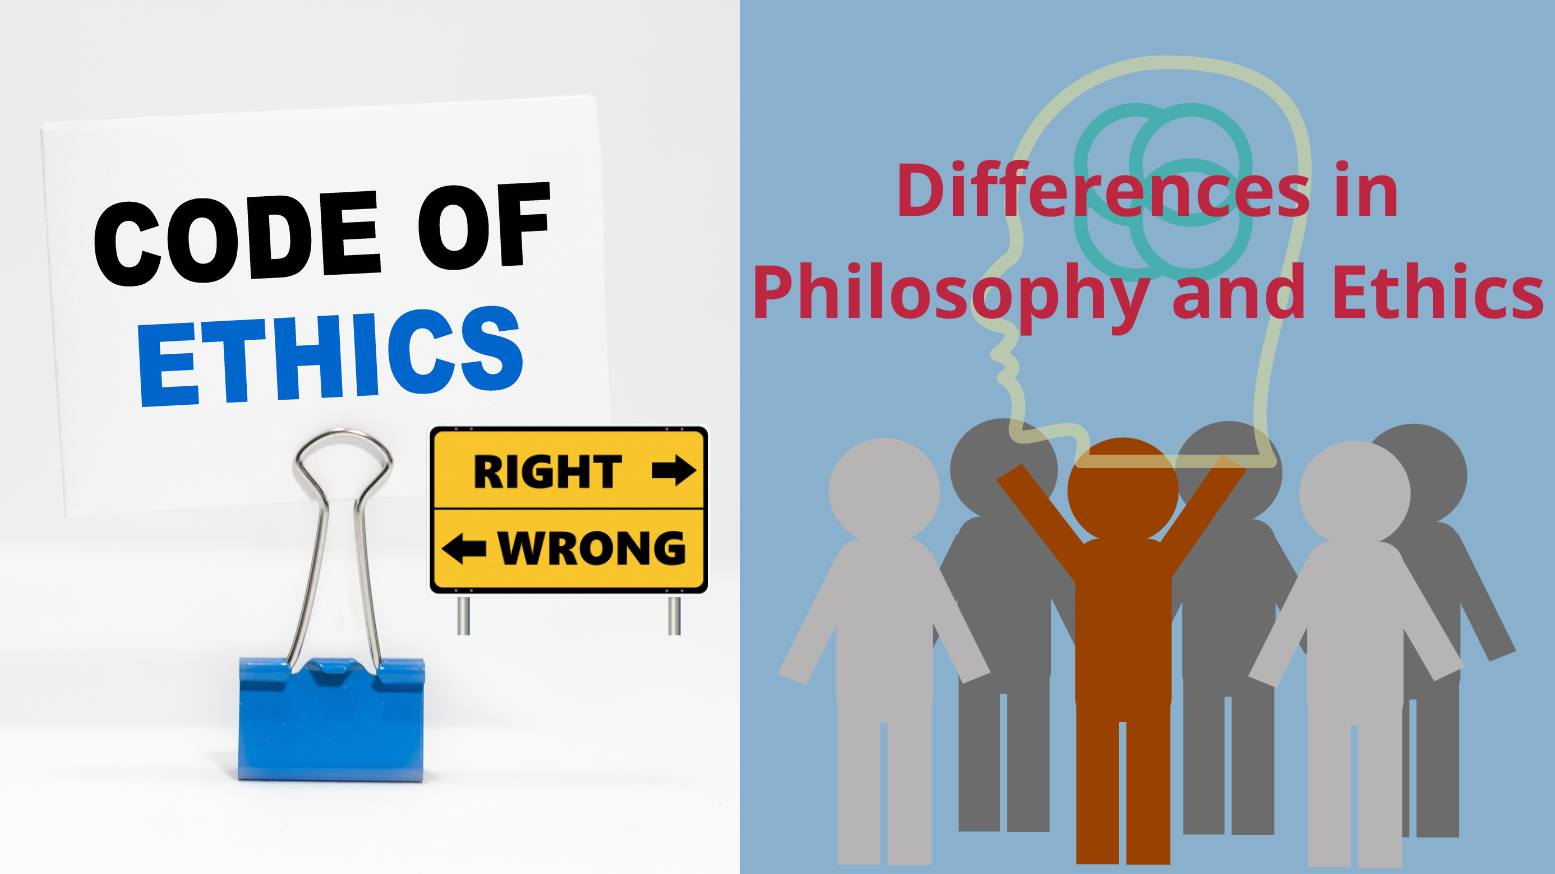 Differences in Philosophy and Ethics